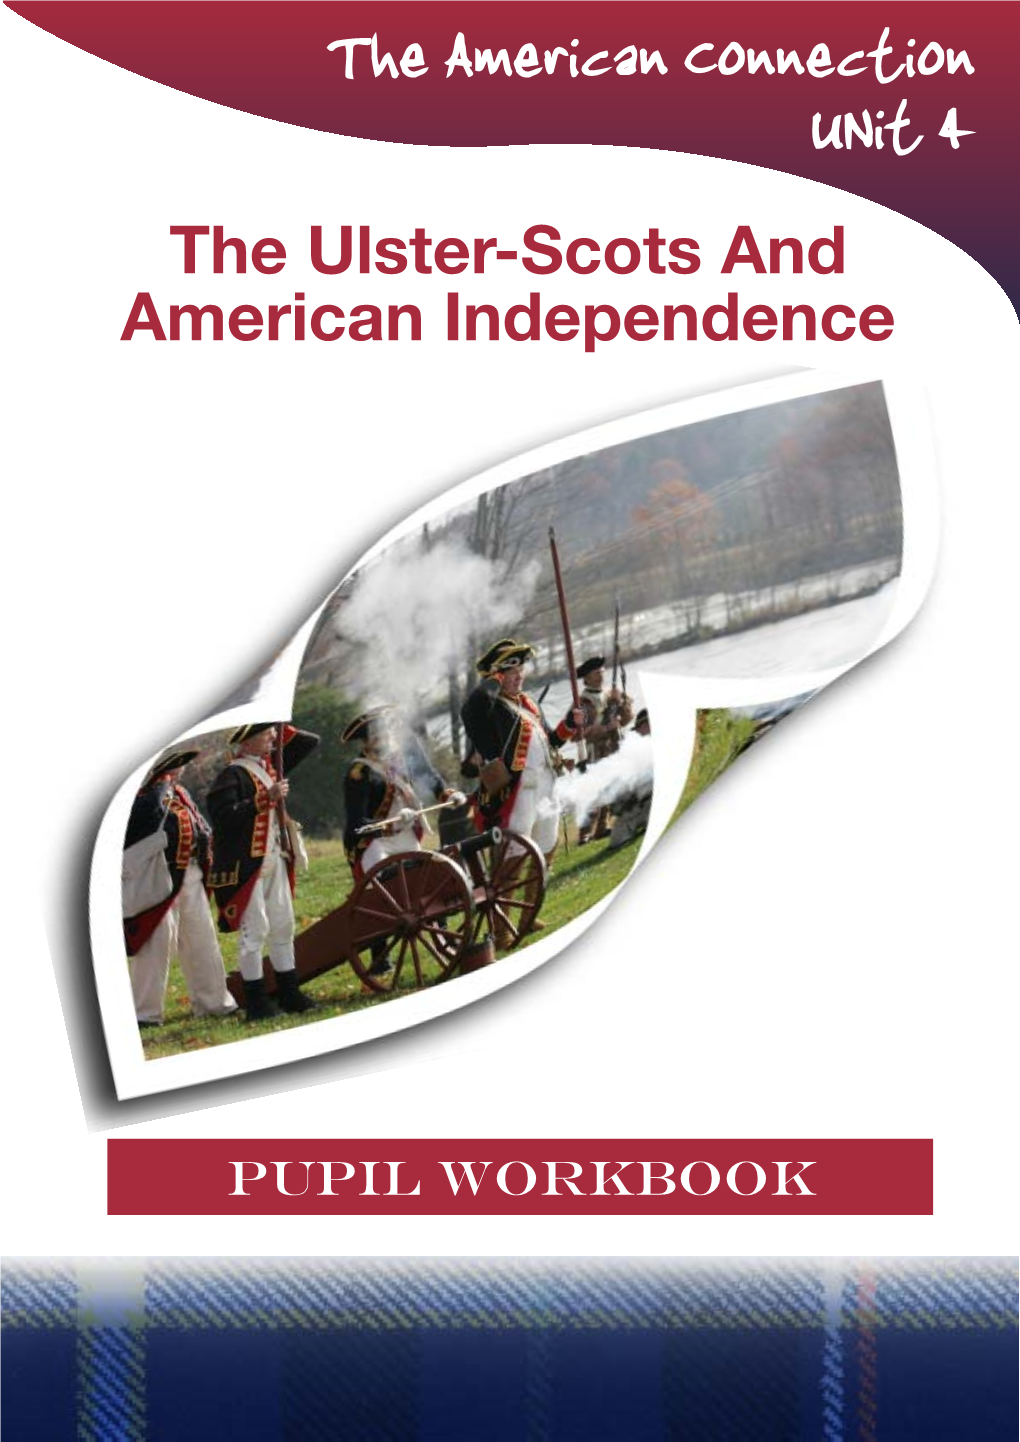 The American Connection Unit 4 the Ulster-Scots and American Independence